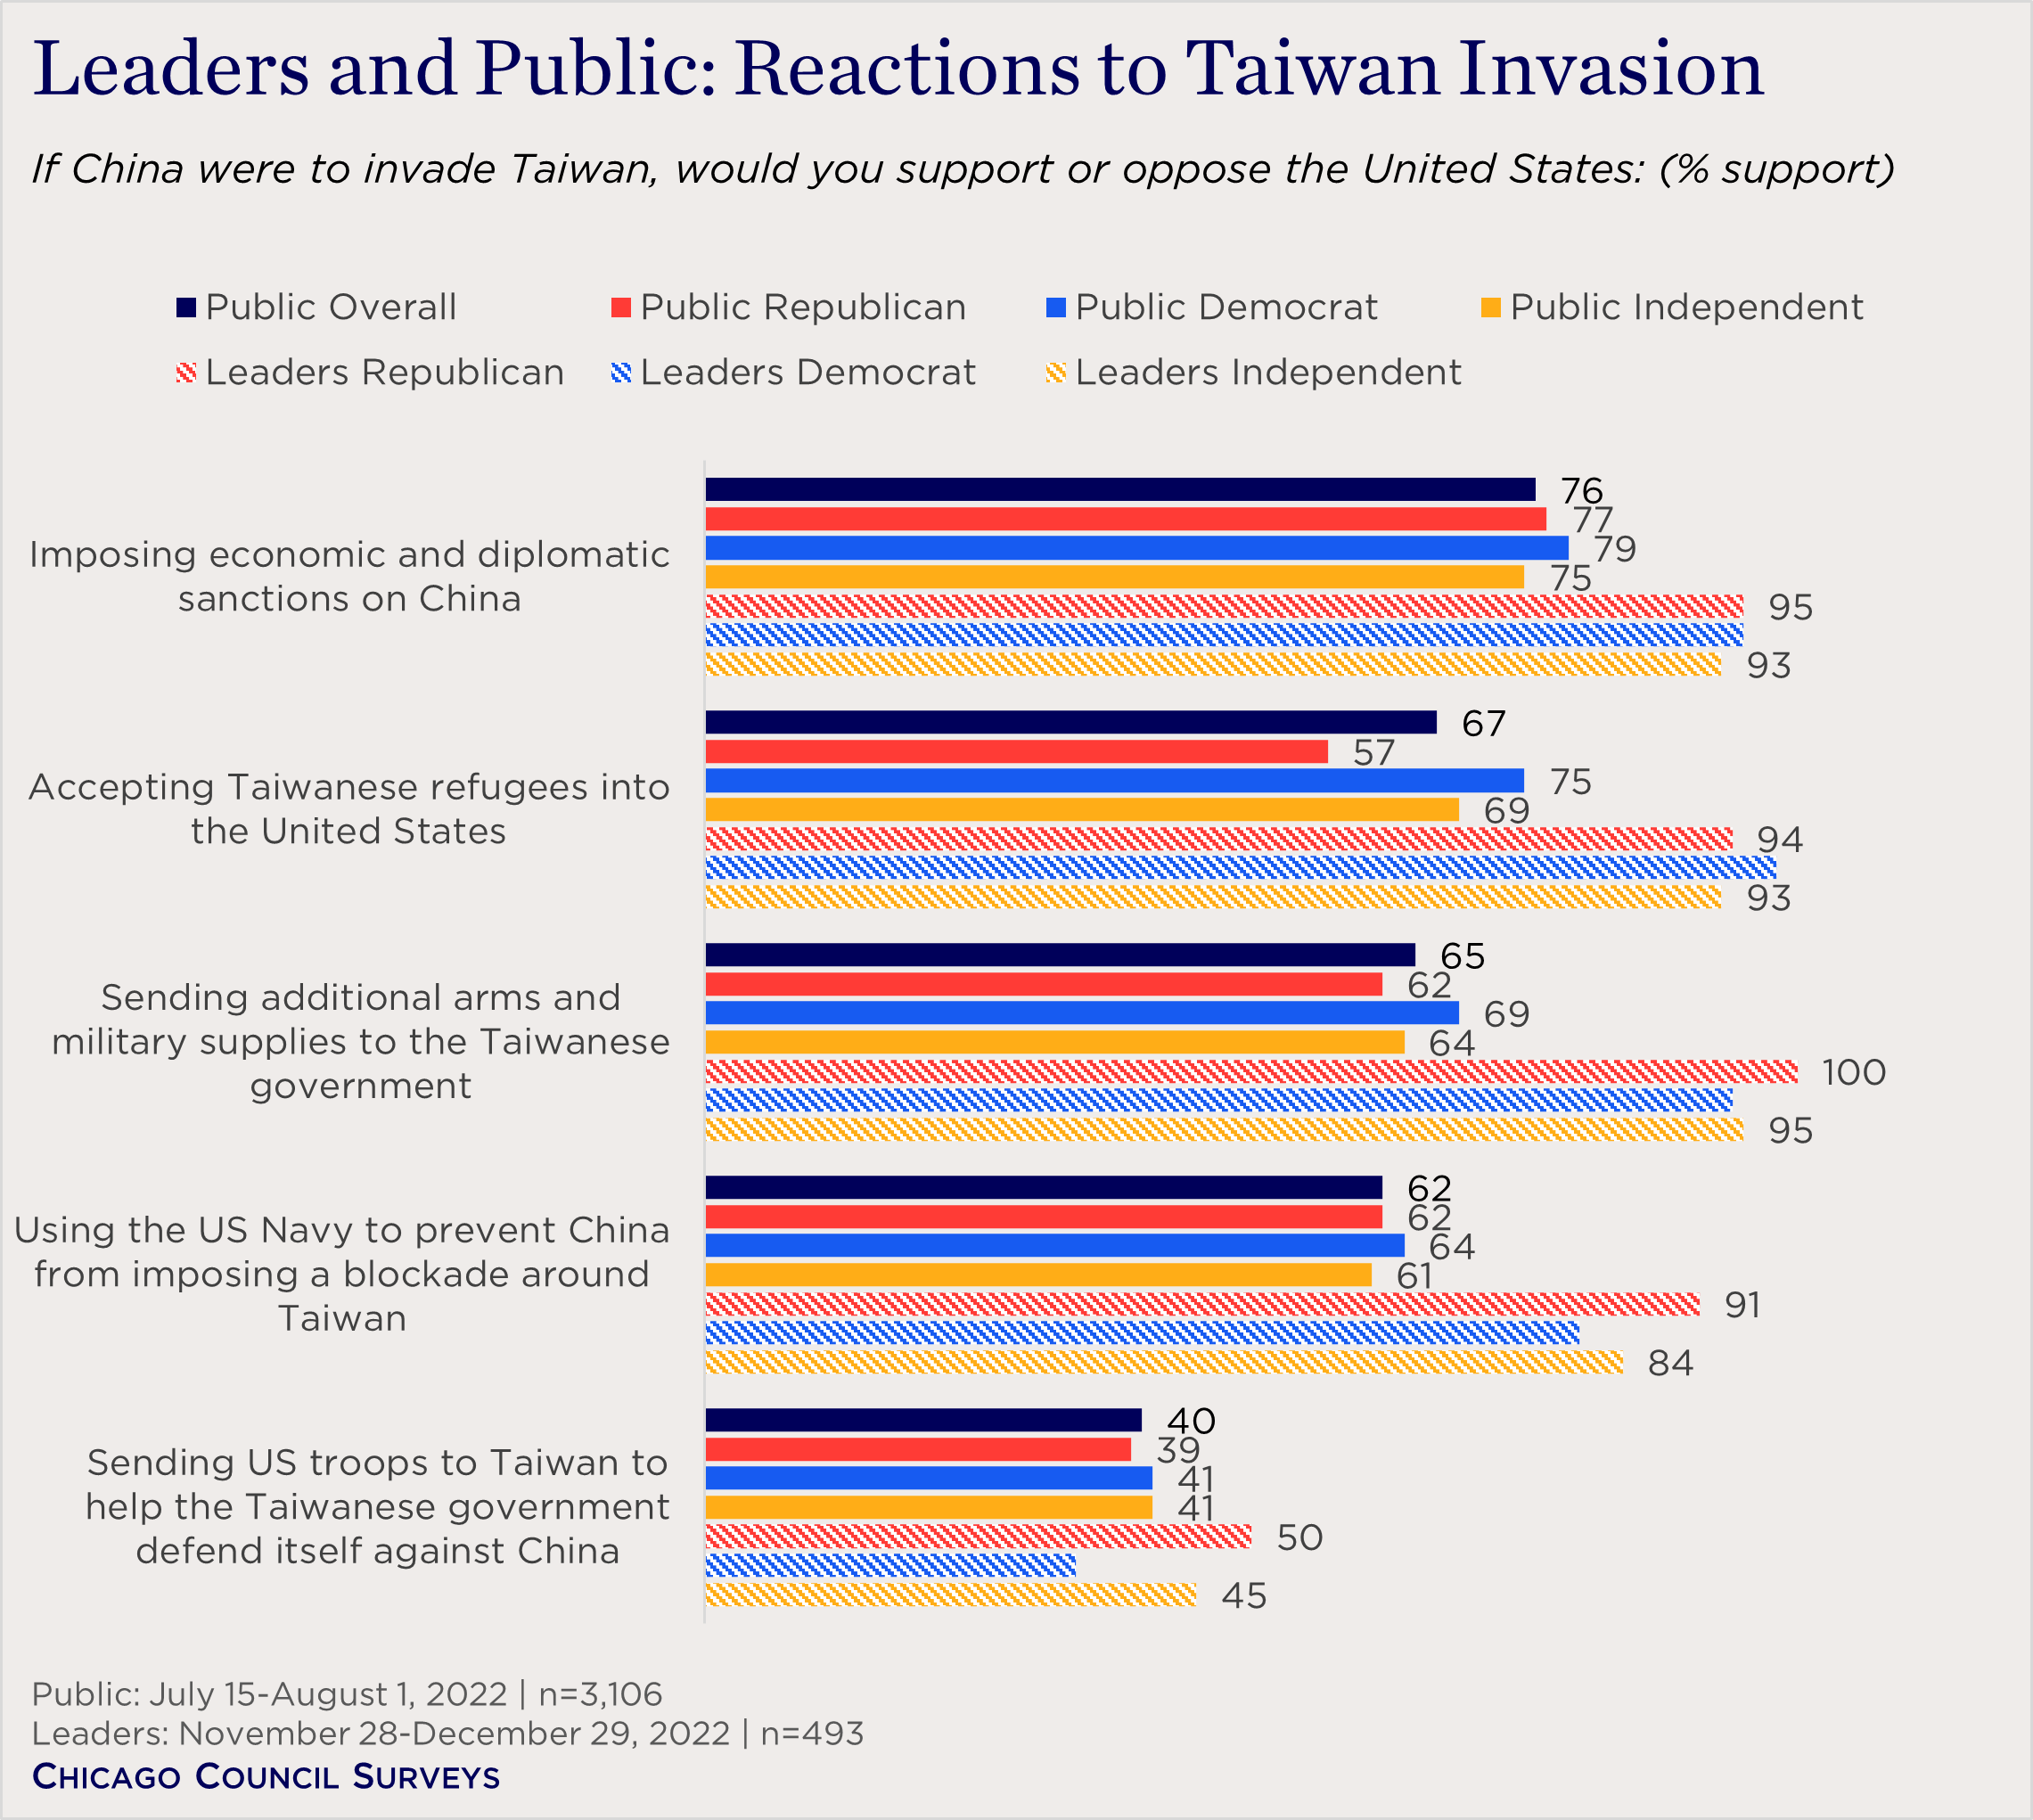 "bar chart showing support for responses to Chinese invasion of Taiwan"